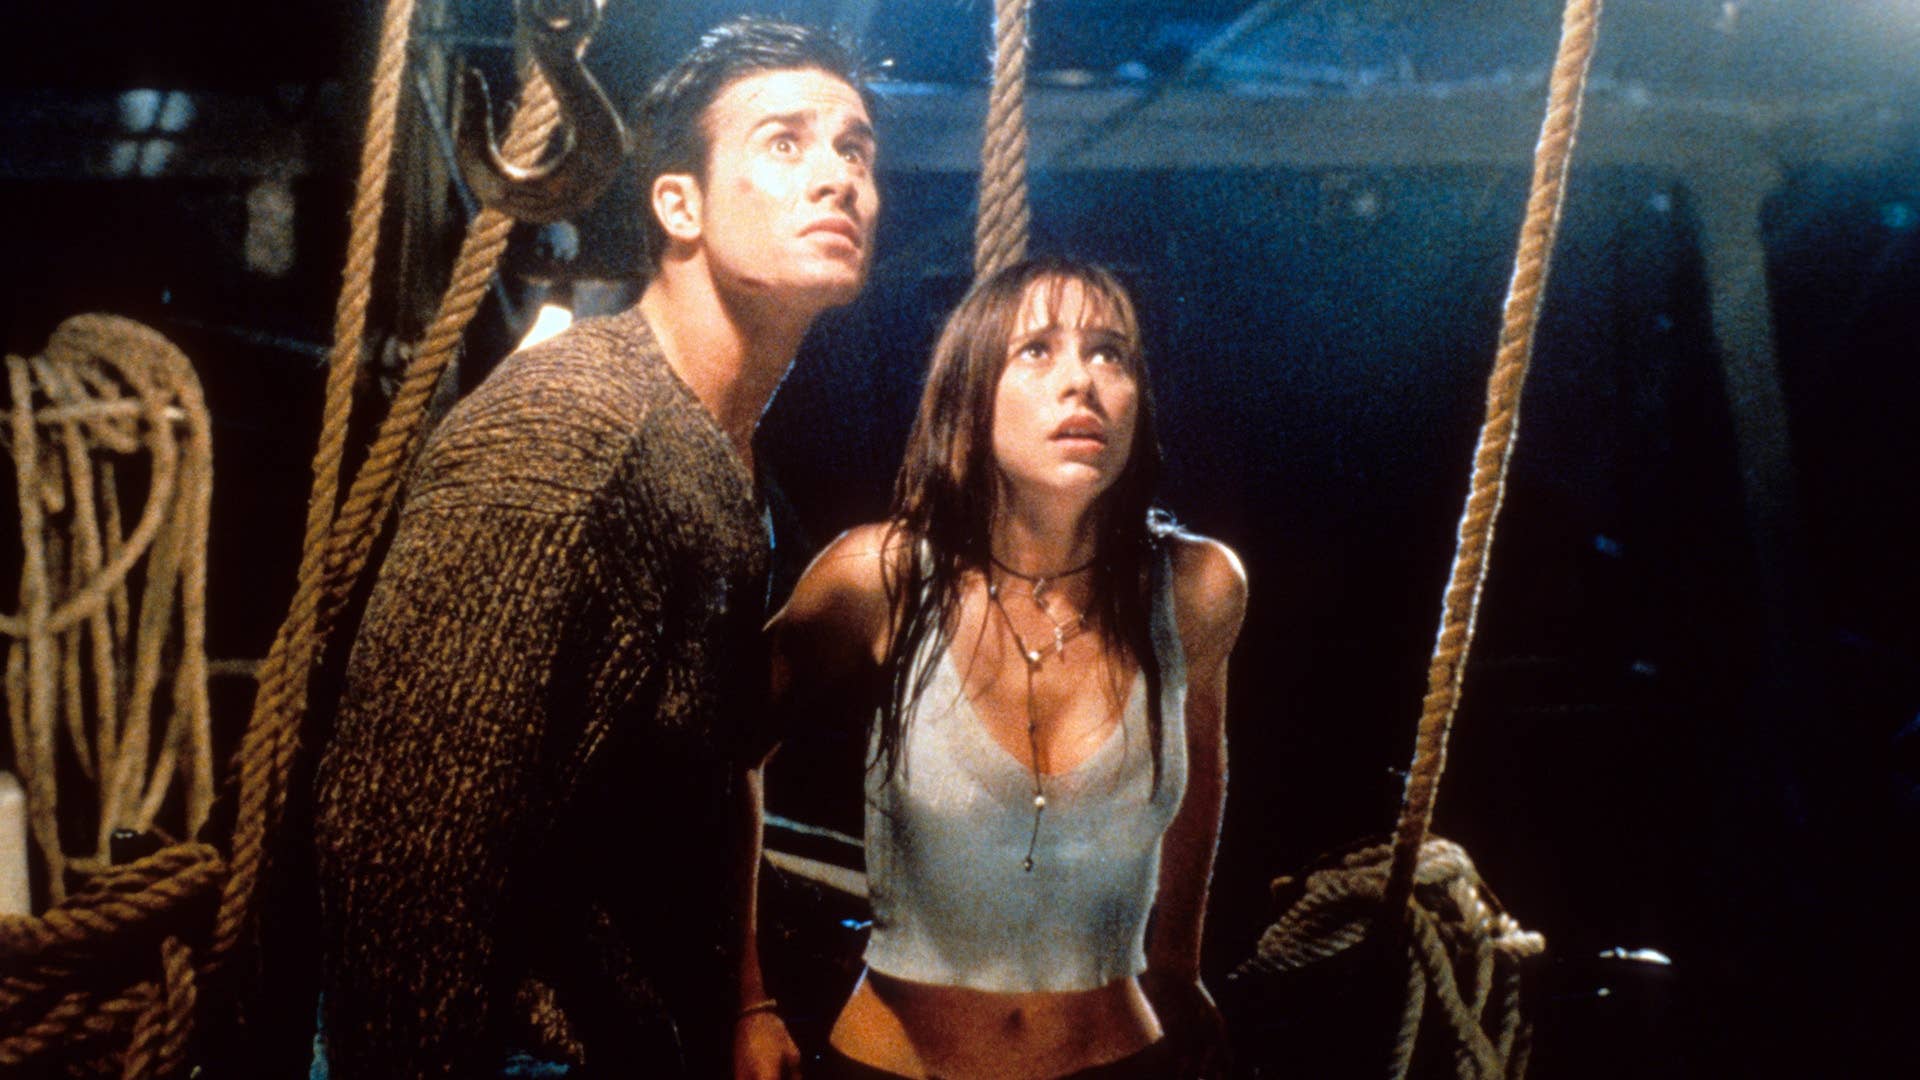 Freddie Prinze Jr and Jennifer Love Hewitt in a scene from 'I Still Know What You Did Last Summer.'